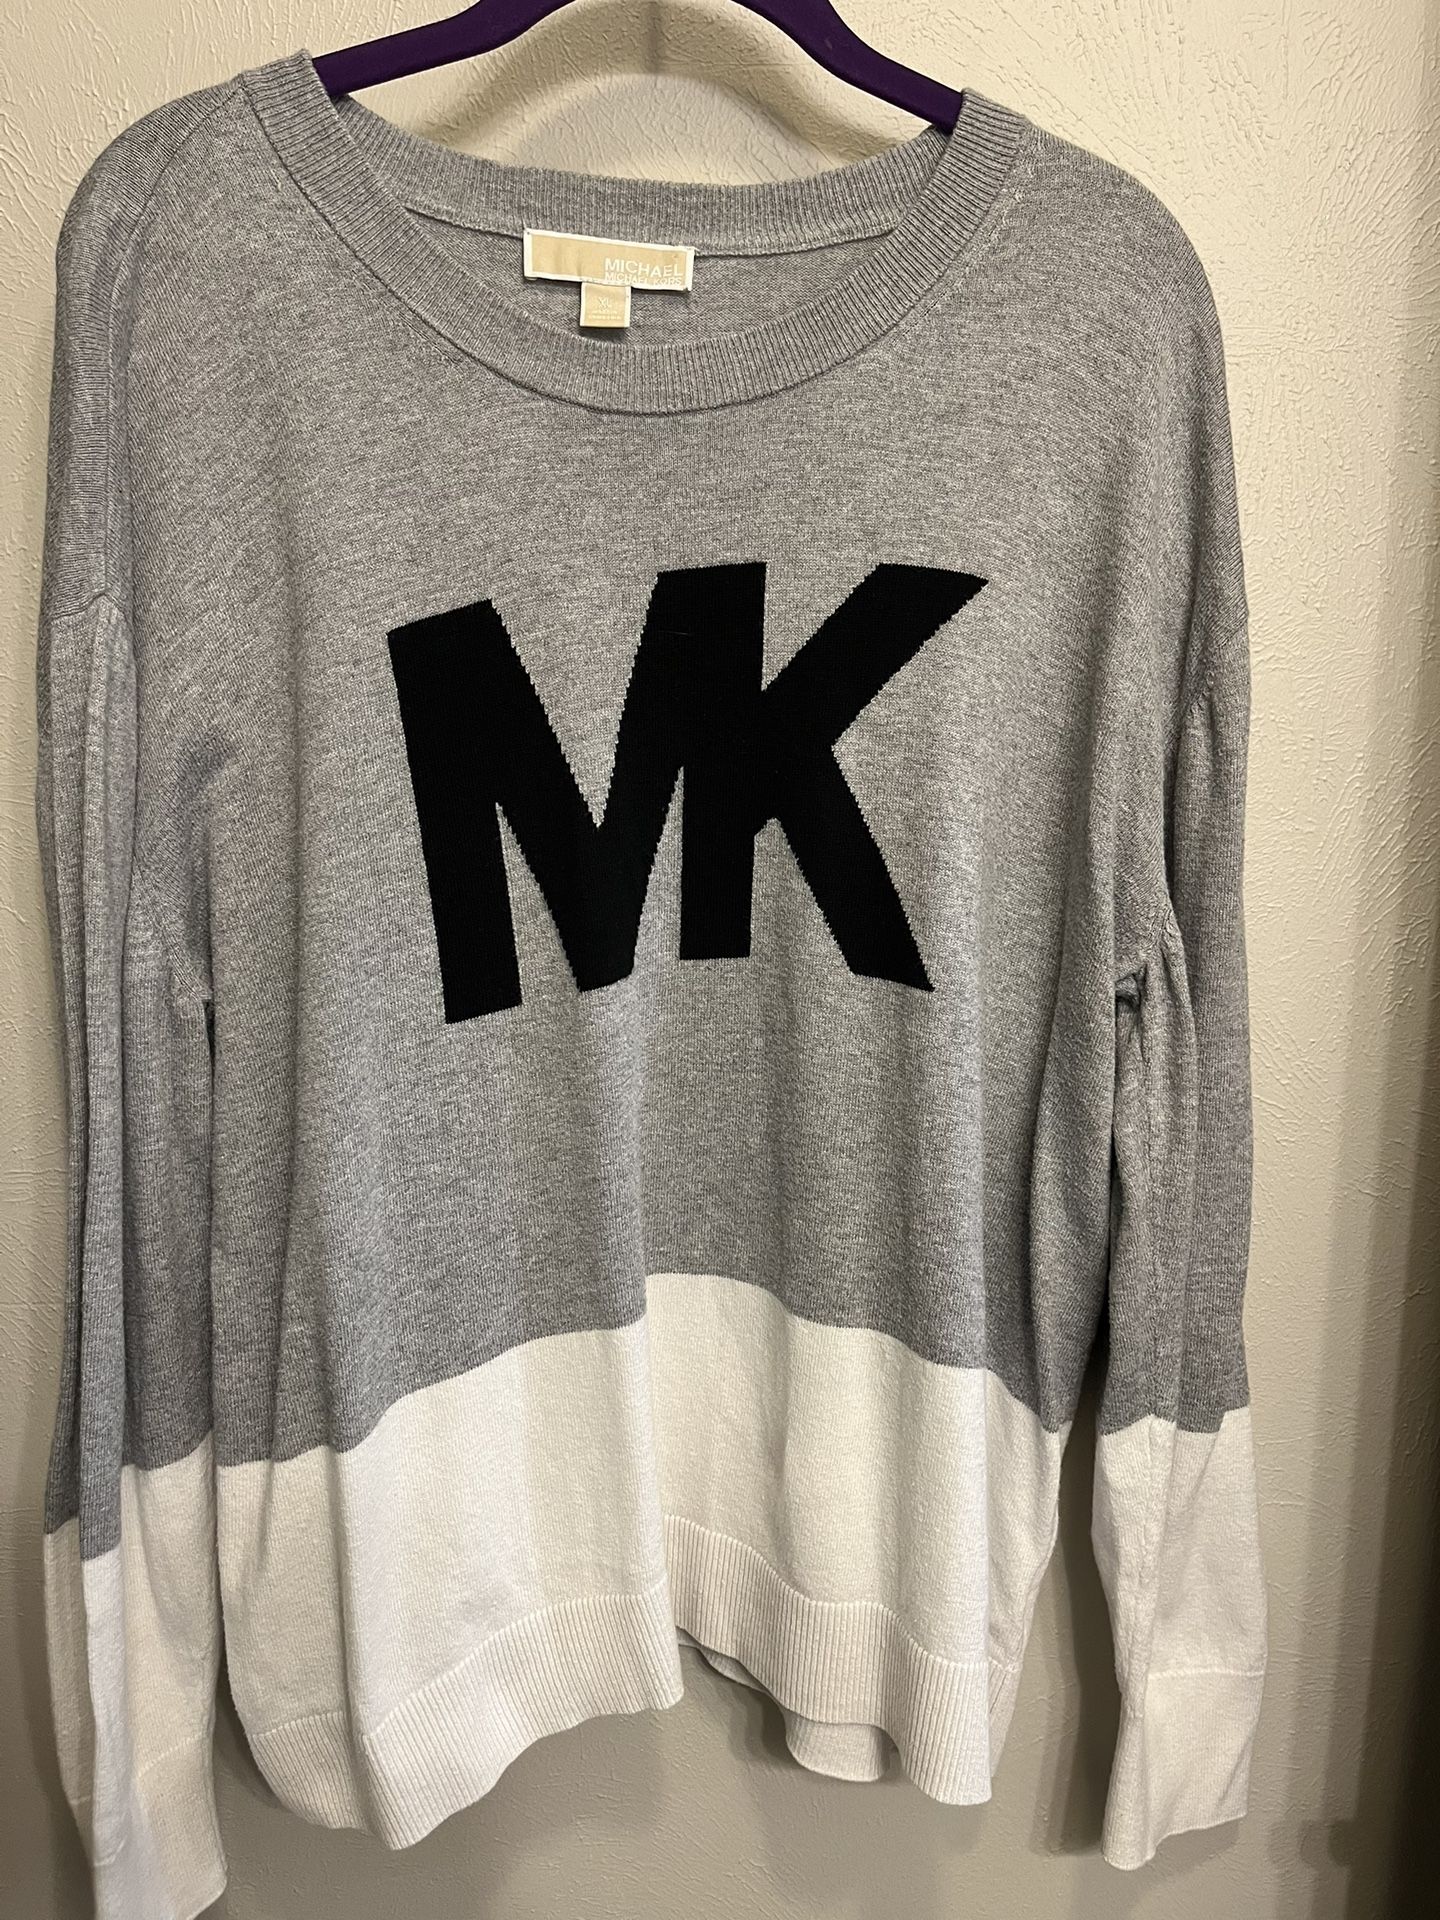 Michael Kors Women’s Grey And White Pullover Sweater XL